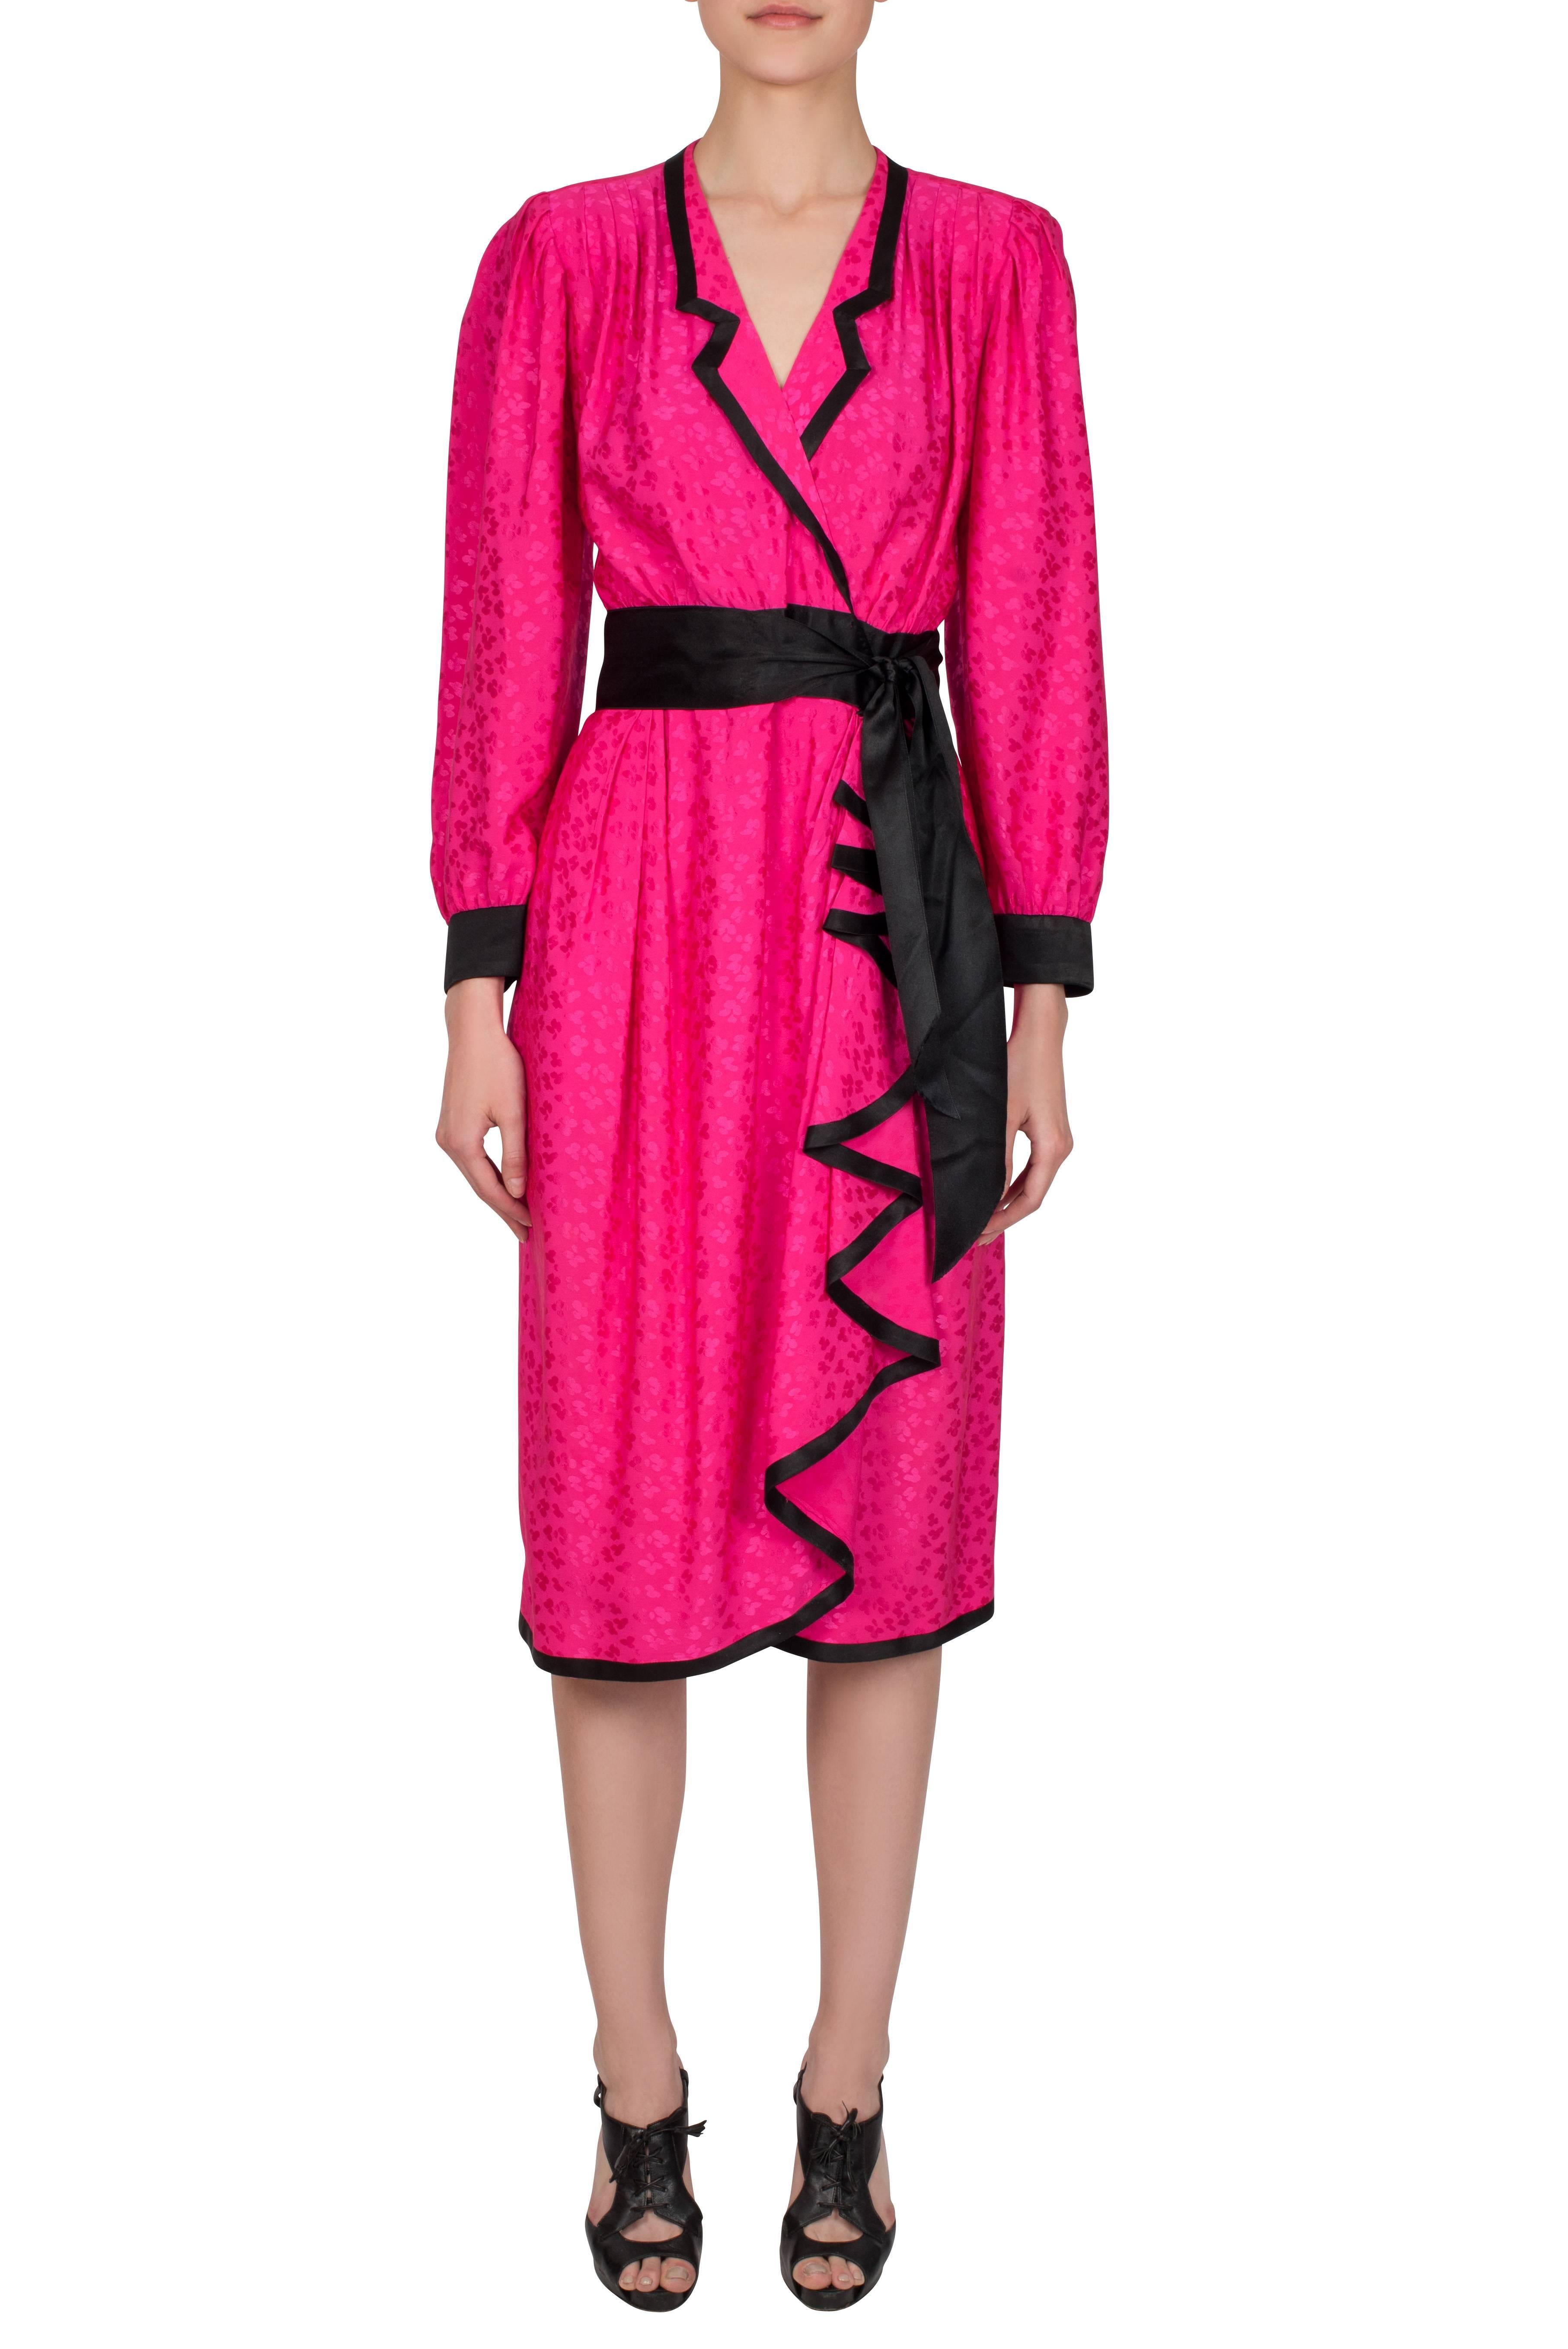 A striking 1980s hot pink silk Emanuel Ungaro Couture midi-length wrap dress with a delicate jacquard floral pattern. This soft, lightweight dress wraps and fastens at the waist using a combination of hook-and-eye and press stud fastenings. These